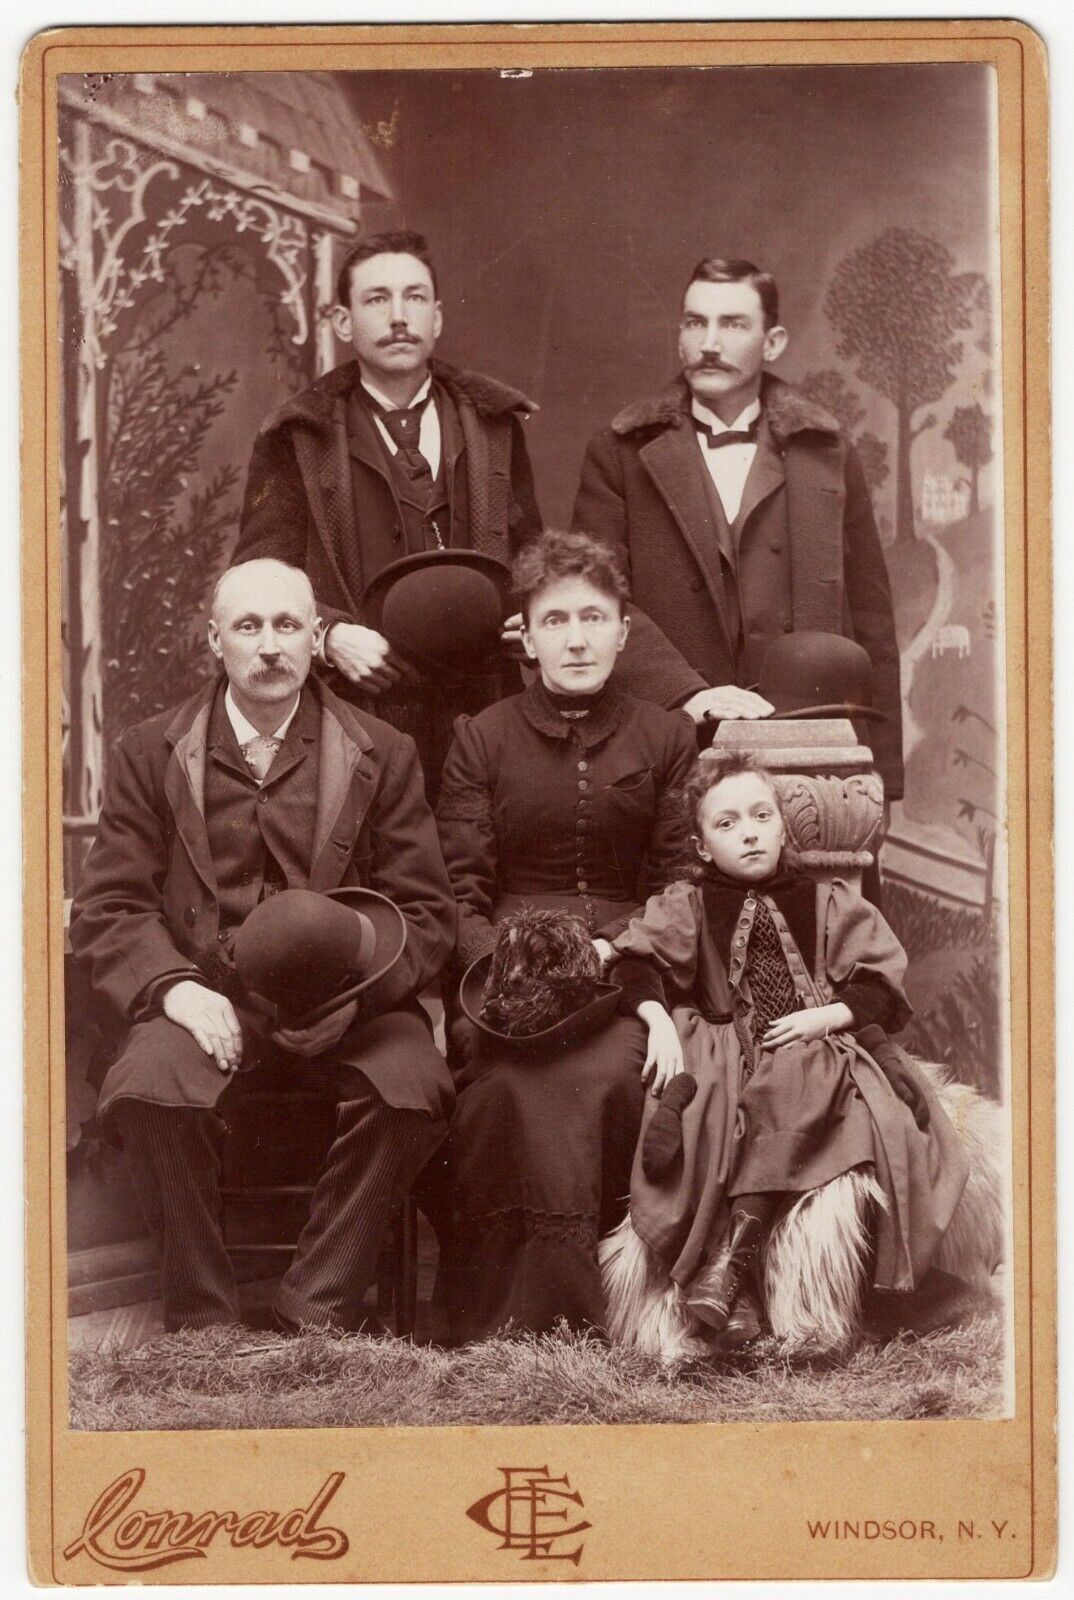 A WINTERTIME FAMILY PORTRAIT IN WINDSOR, NEW YORK : FAMILY OF FIVE: CABINET CARD